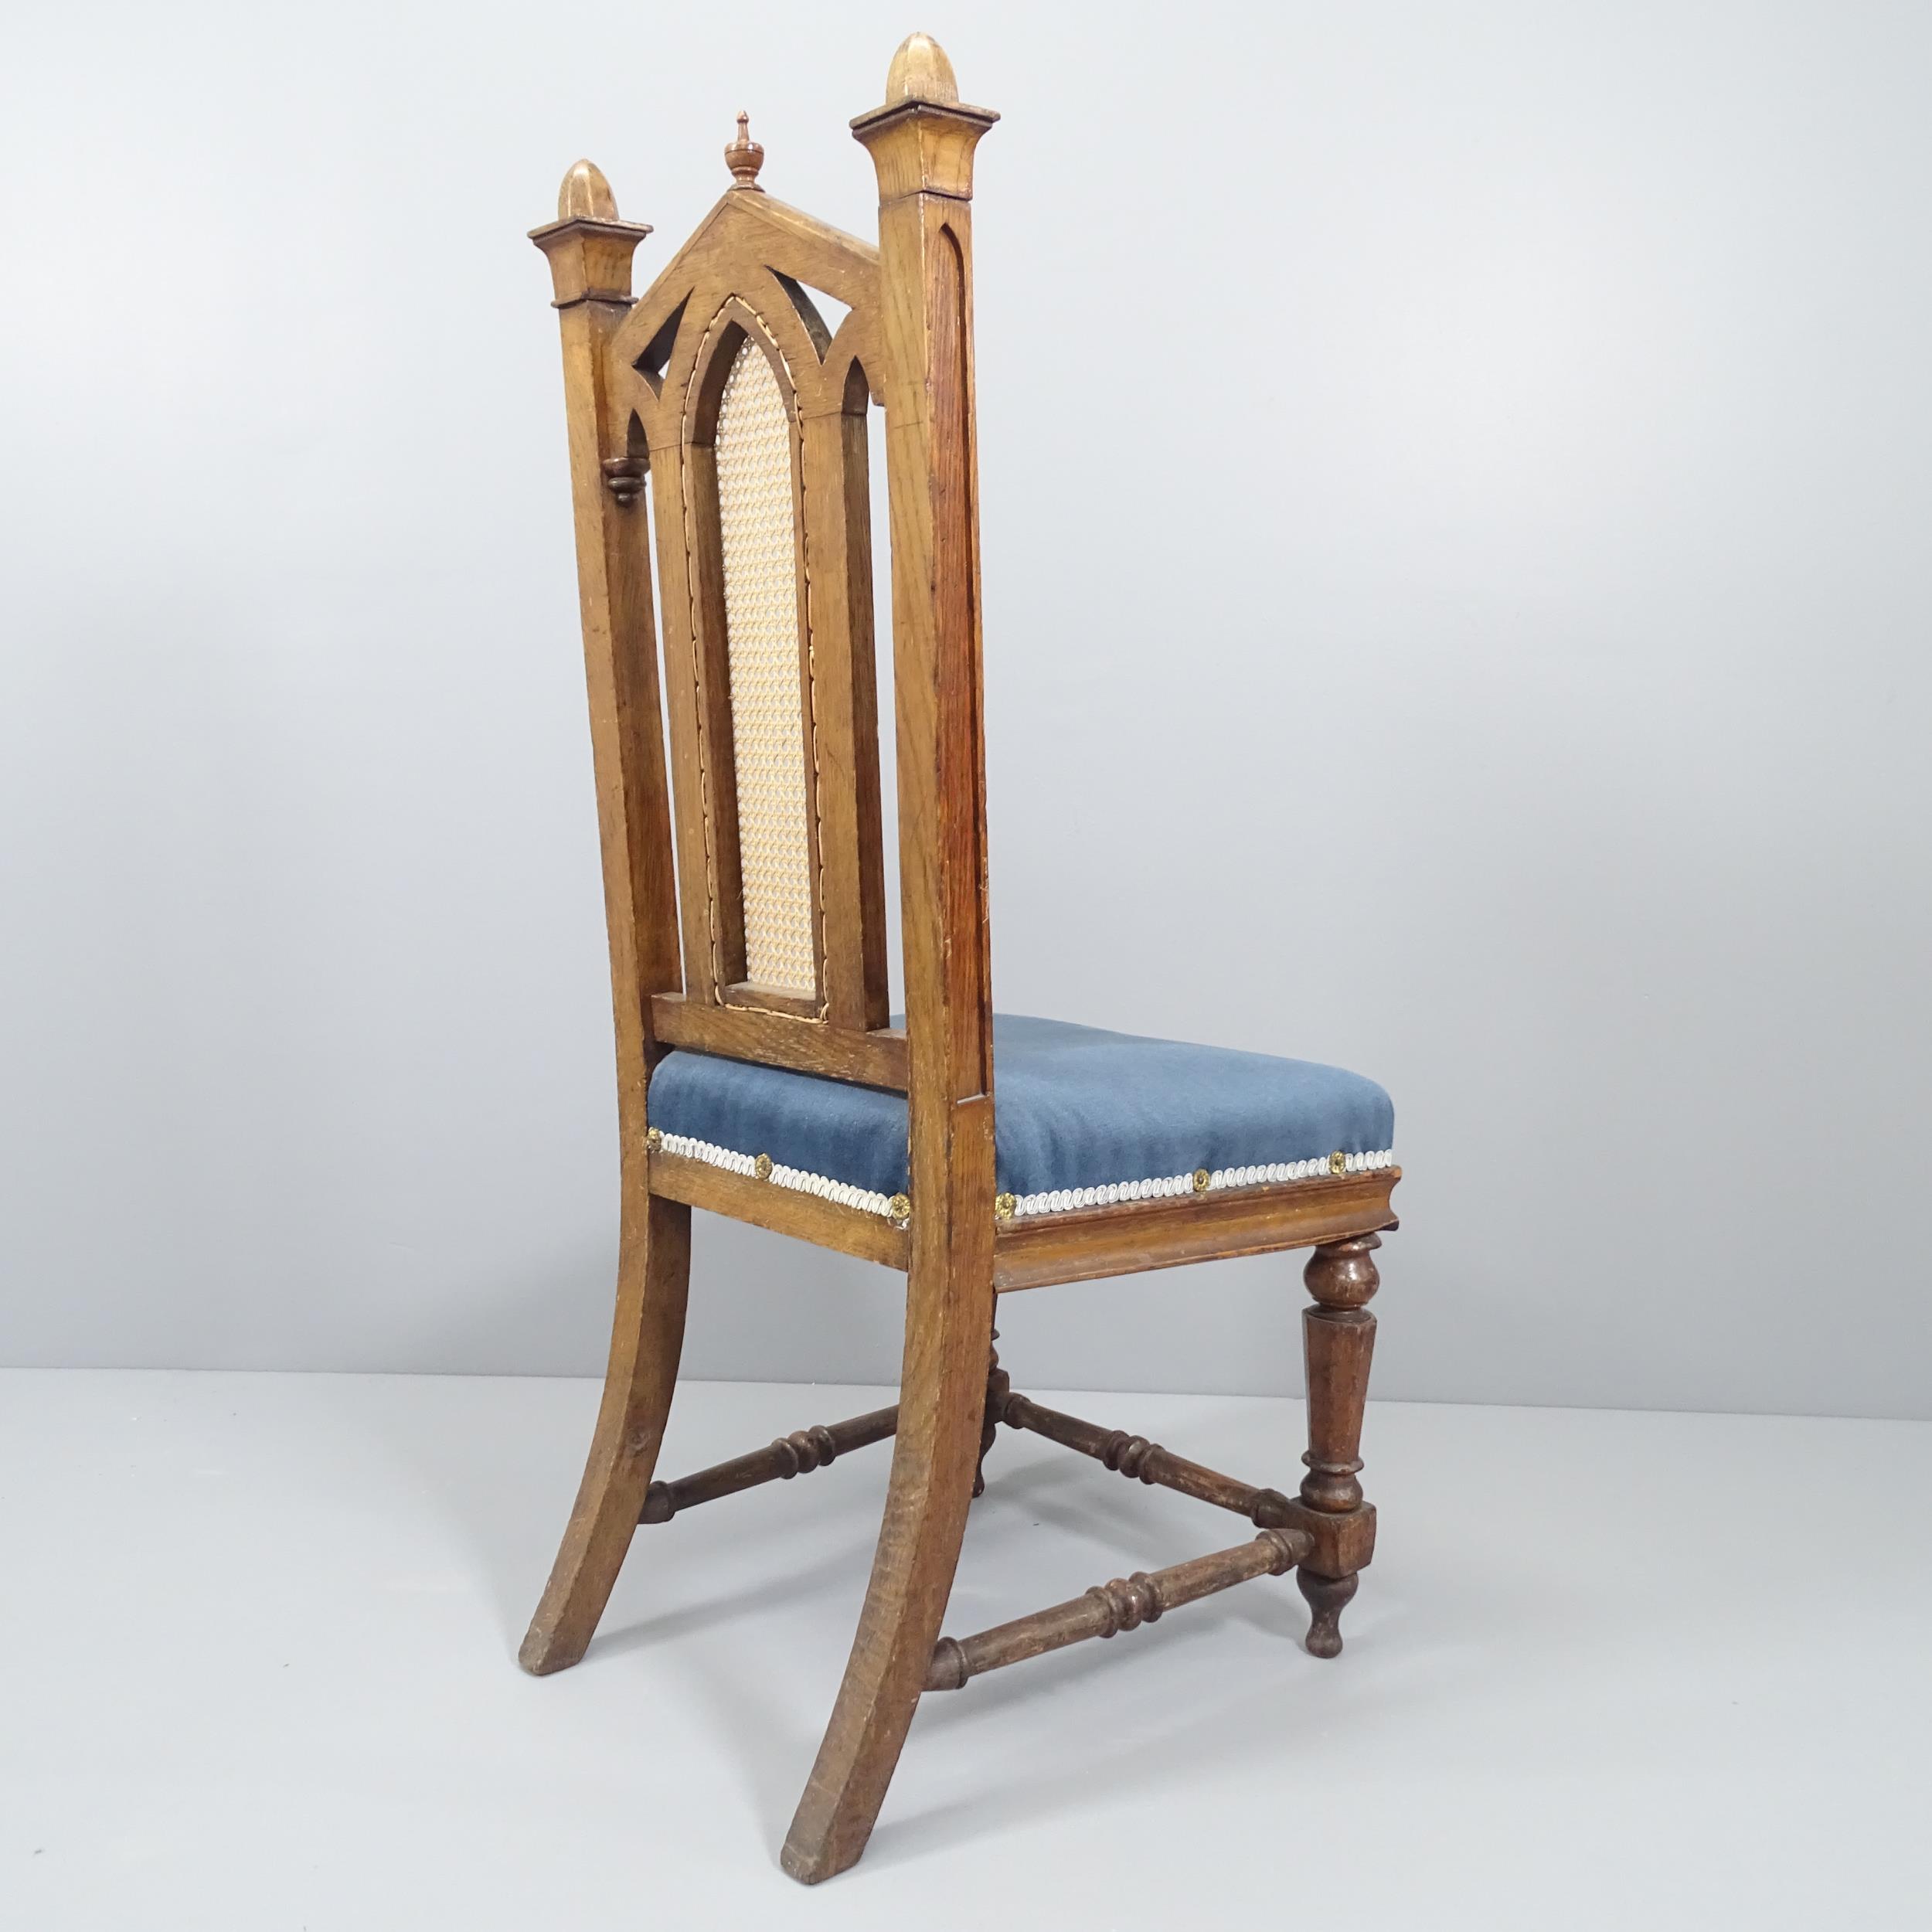 WITHDRAWN - An antique Gothic oak and upholstered Pugin style chair, with cane panelled back. - Image 2 of 2